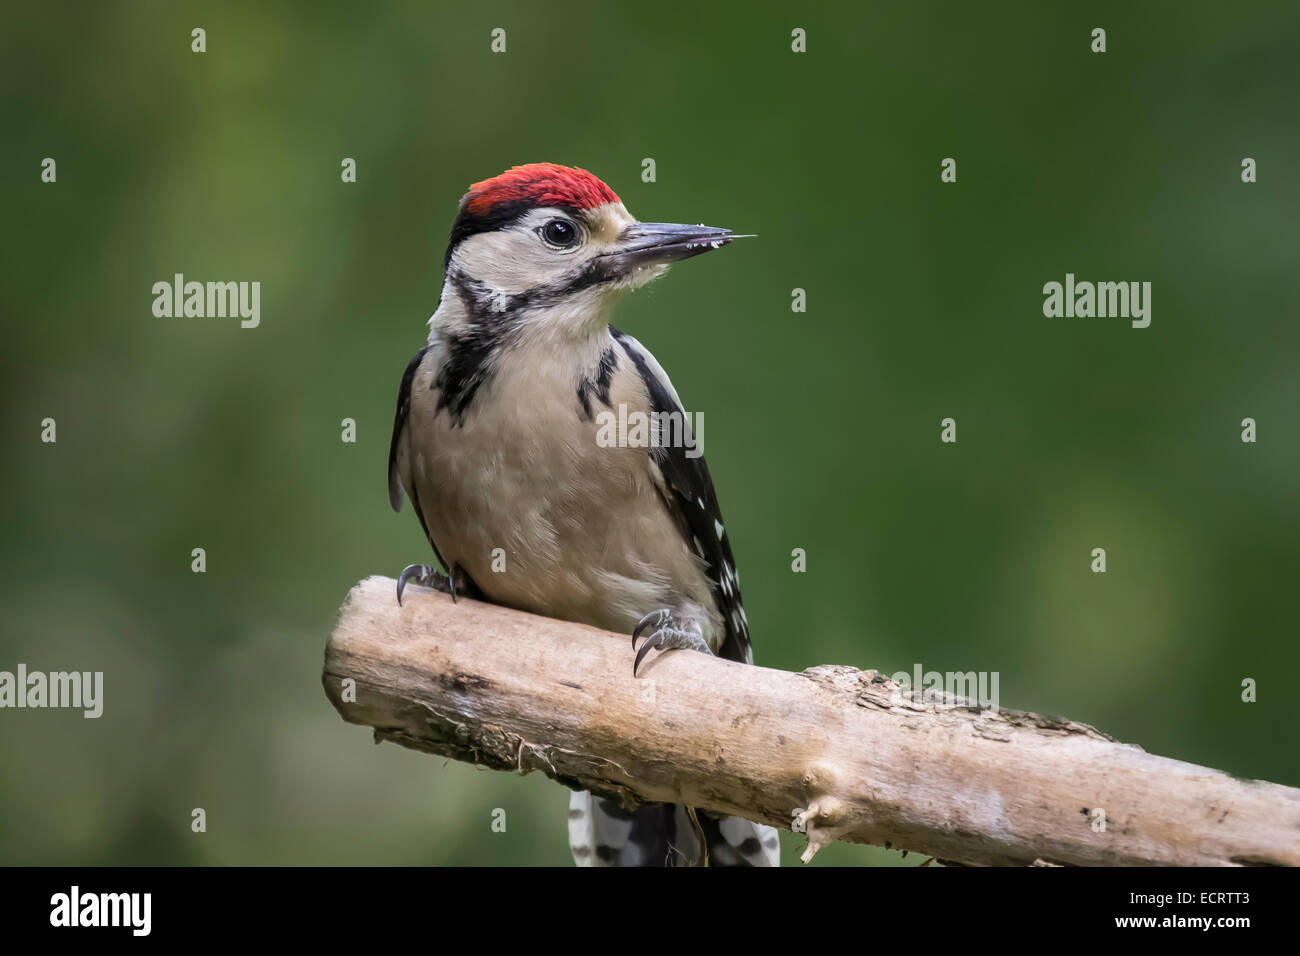 Juvenile woodpecker perched on a branch against a plain natural background Stock Photo